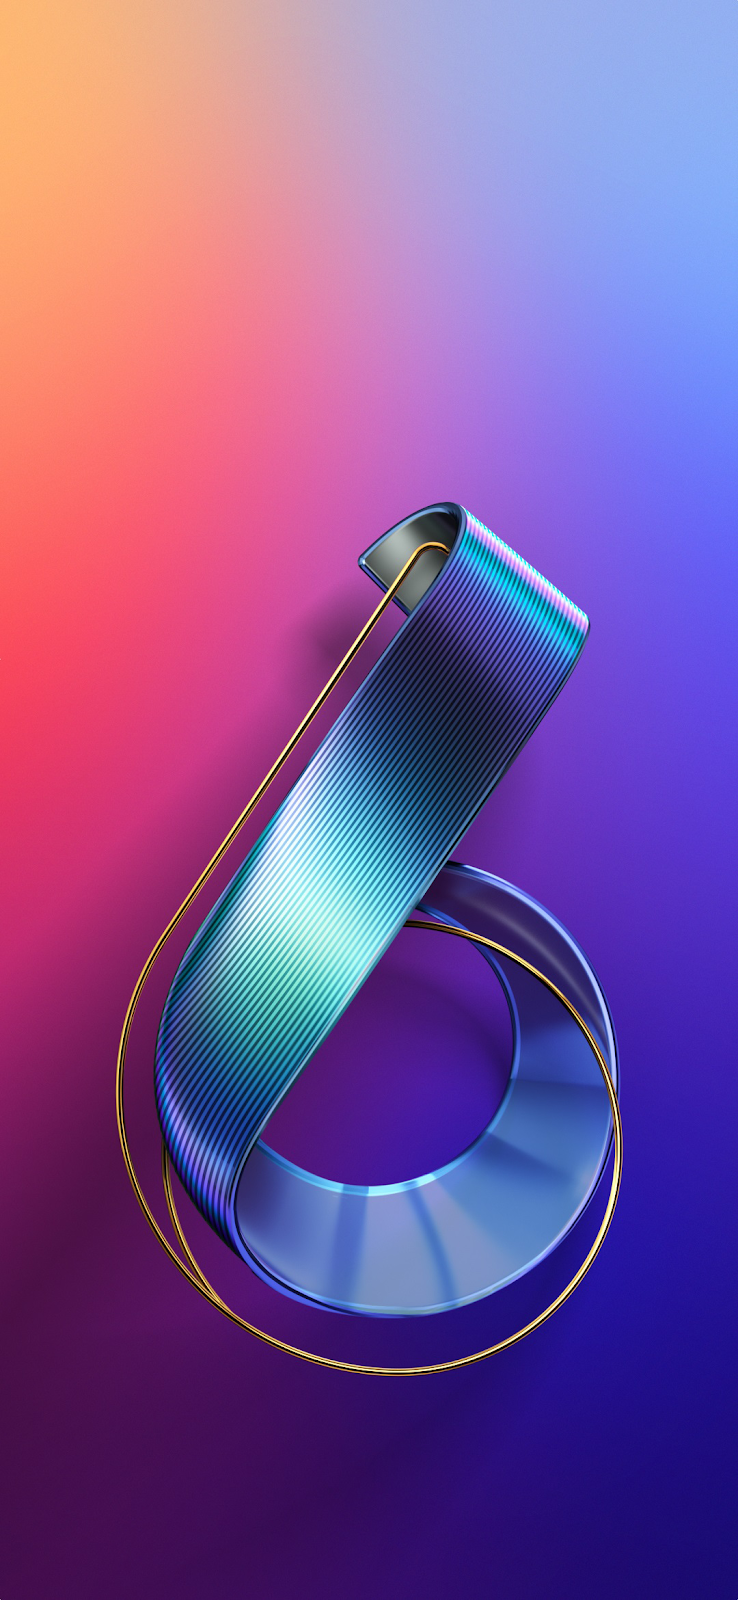 Asus Zenfone 6 2019 Stock wallpaper #wallpaper #iphone #android #background #followme. New wallpaper iphone, Best wallpaper android, Full HD wallpaper android